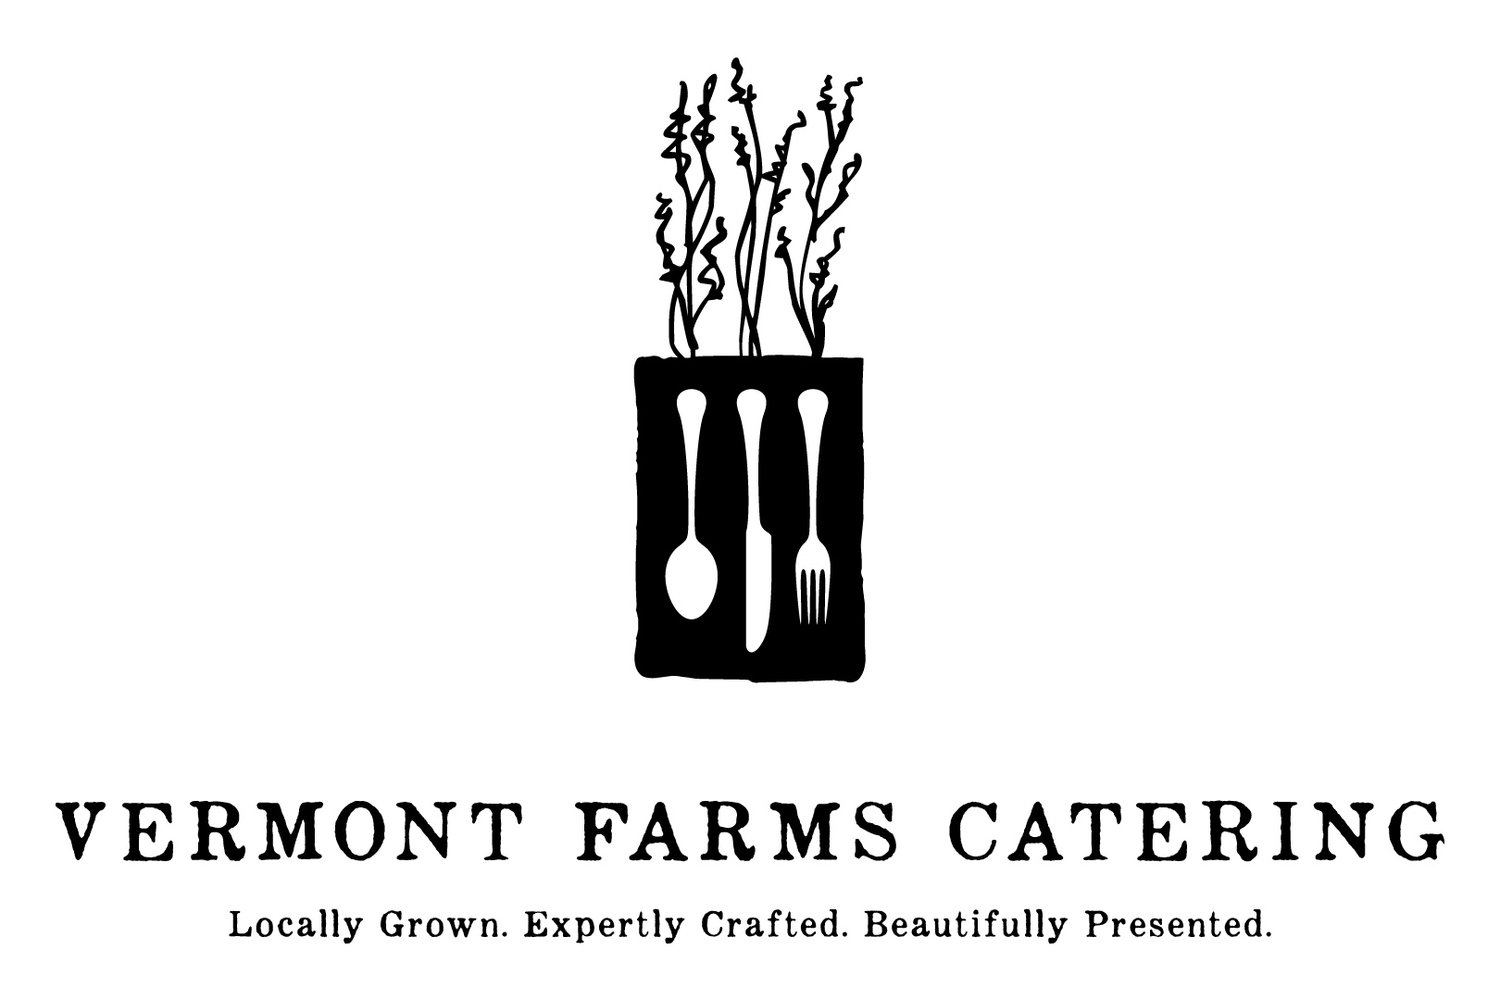 Vermont Farms Catering